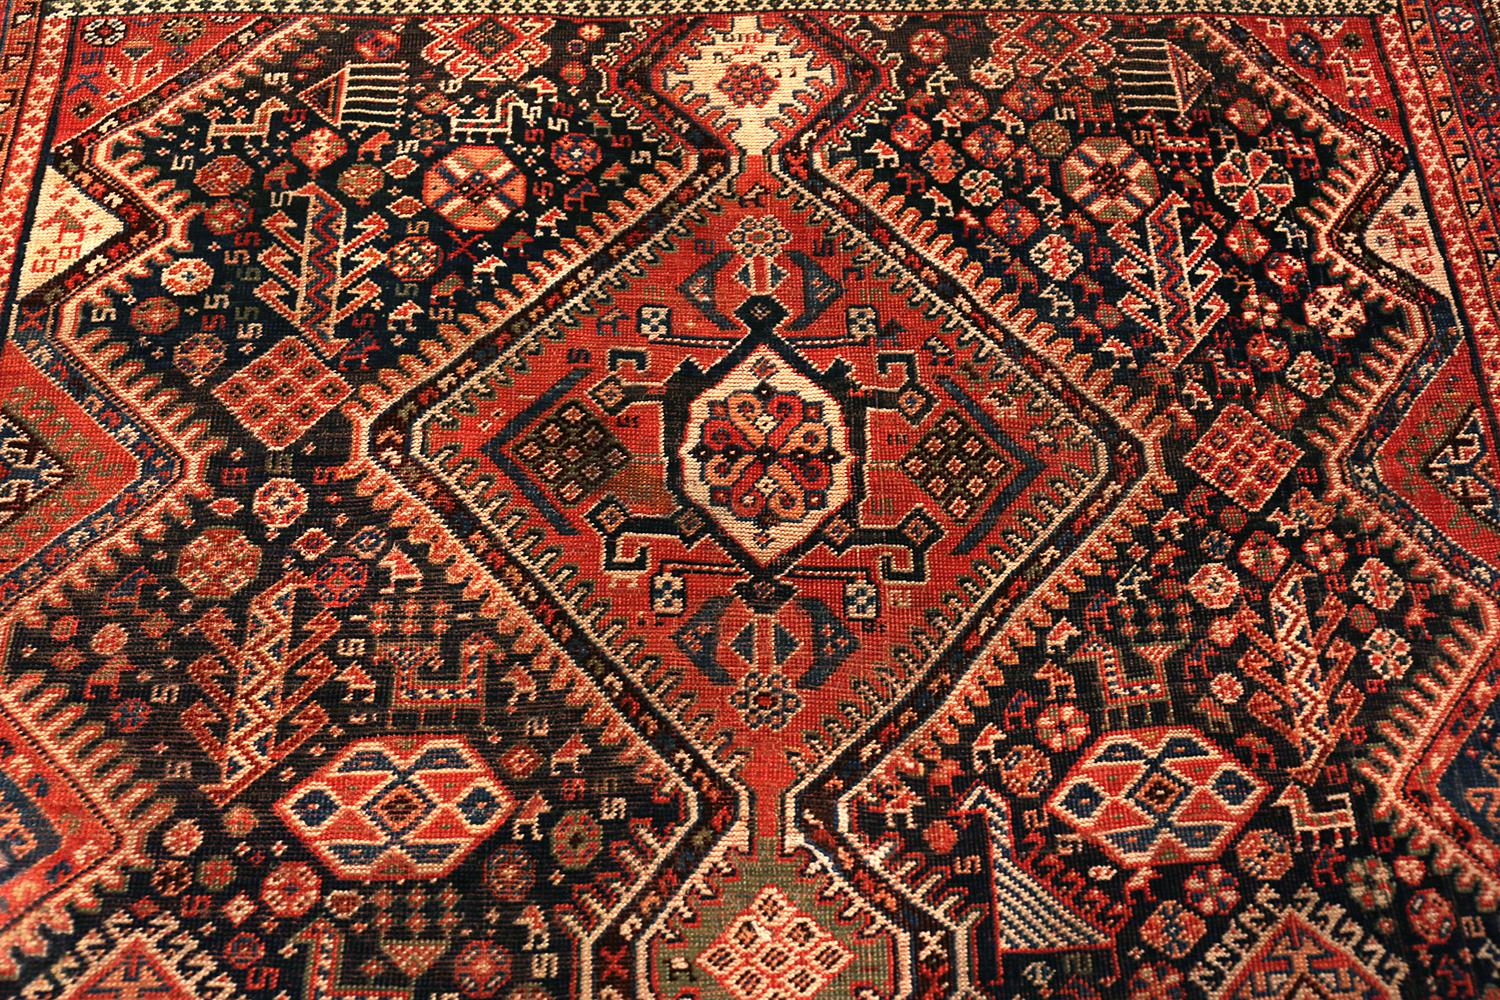 Hand-Knotted Tribal Antique Persian Qashqai Rug